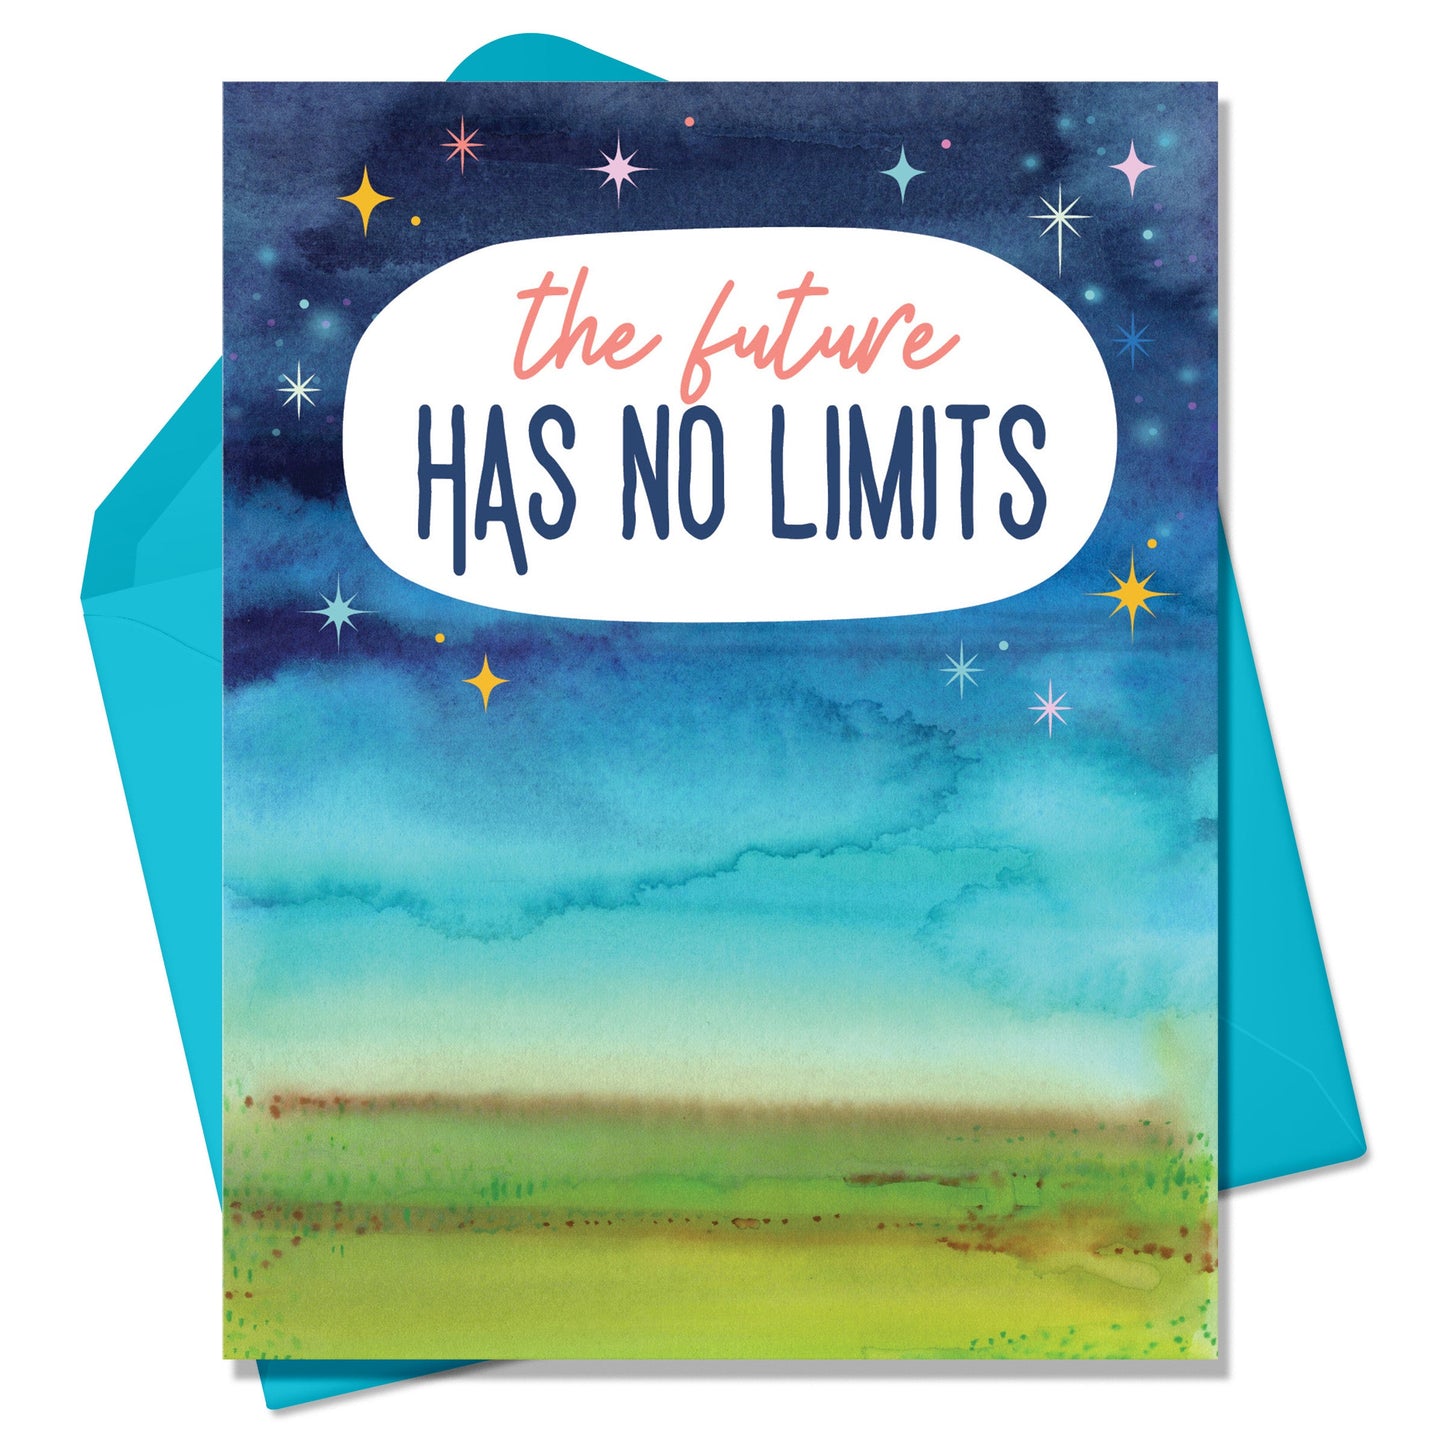 The Future Has No Limits Greeting cards. WAtercolor landscape with sparkly stars. There is a turquoise blue envelope and it sits on a white background. 